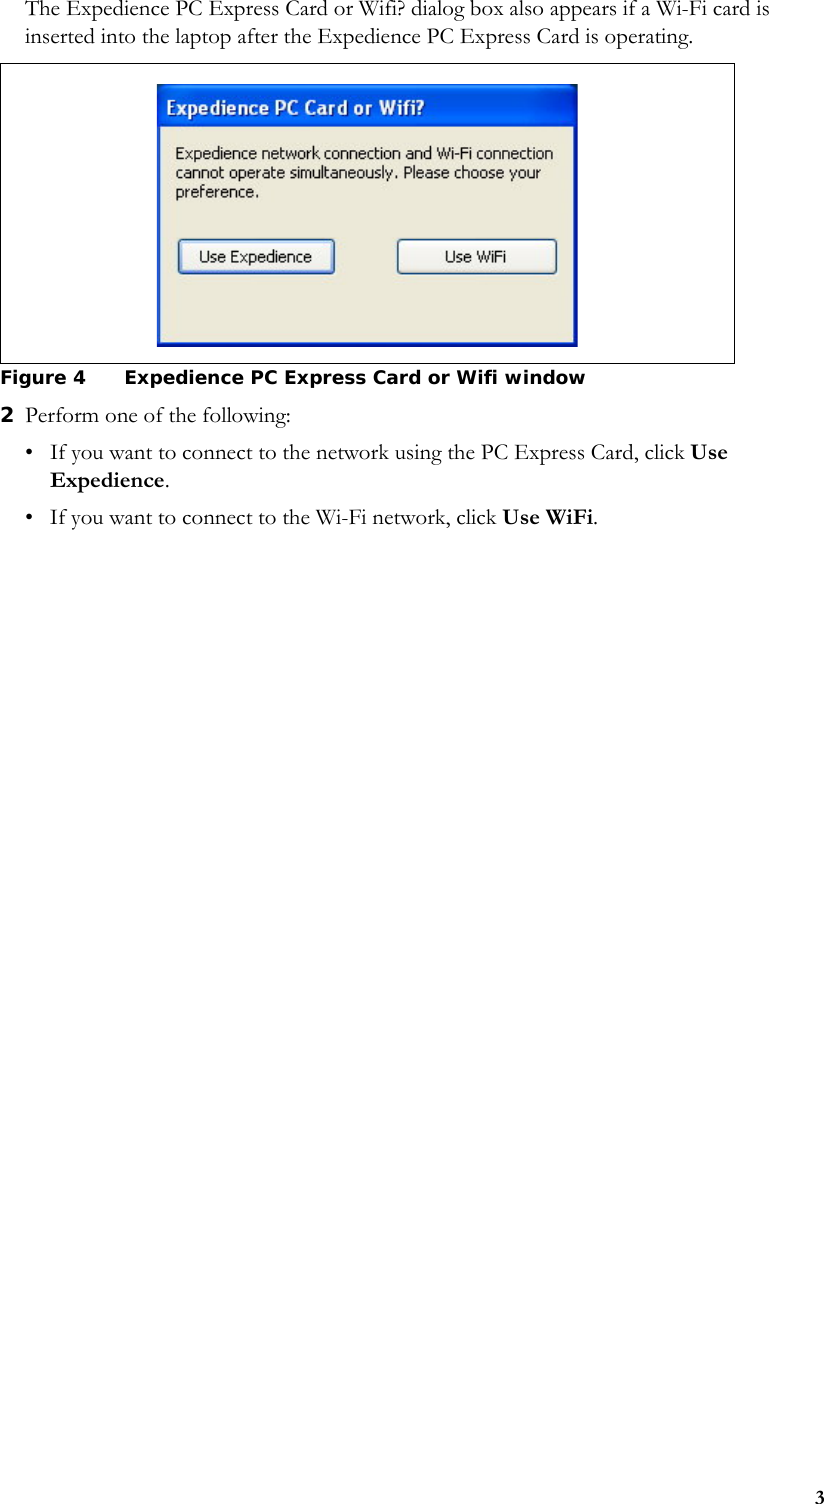 3The Expedience PC Express Card or Wifi? dialog box also appears if a Wi-Fi card is inserted into the laptop after the Expedience PC Express Card is operating.2Perform one of the following: • If you want to connect to the network using the PC Express Card, click Use Expedience. • If you want to connect to the Wi-Fi network, click Use WiFi. Figure 4 Expedience PC Express Card or Wifi window